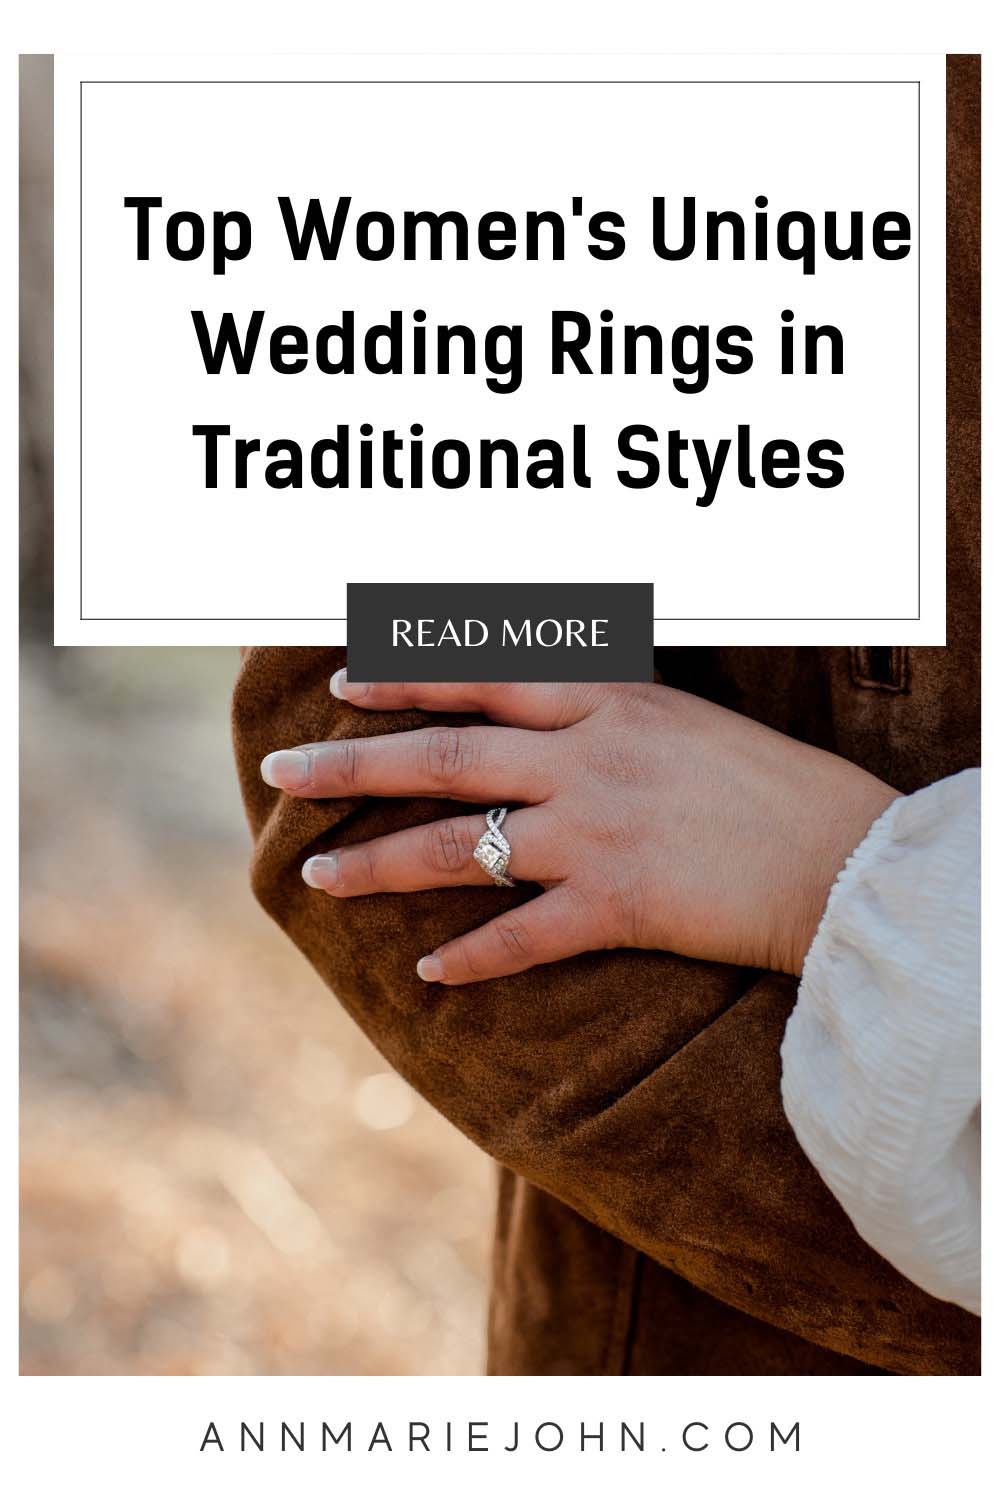 Wedding Rings in Traditional Styles